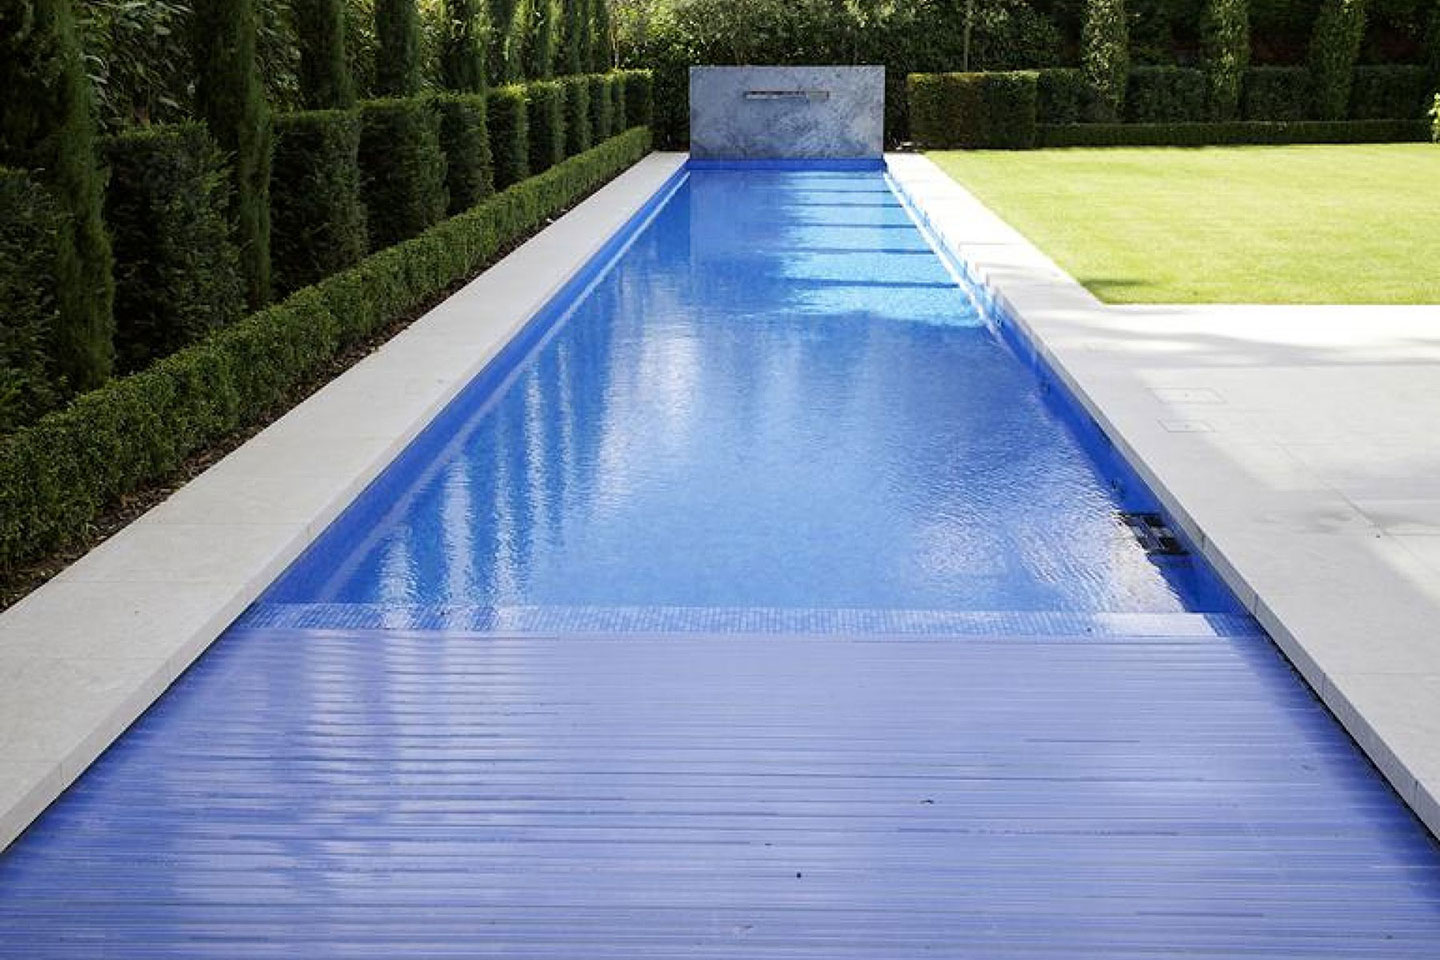 Bespoke Design for a Guncast Outdoor Swimming Pool in Surrey